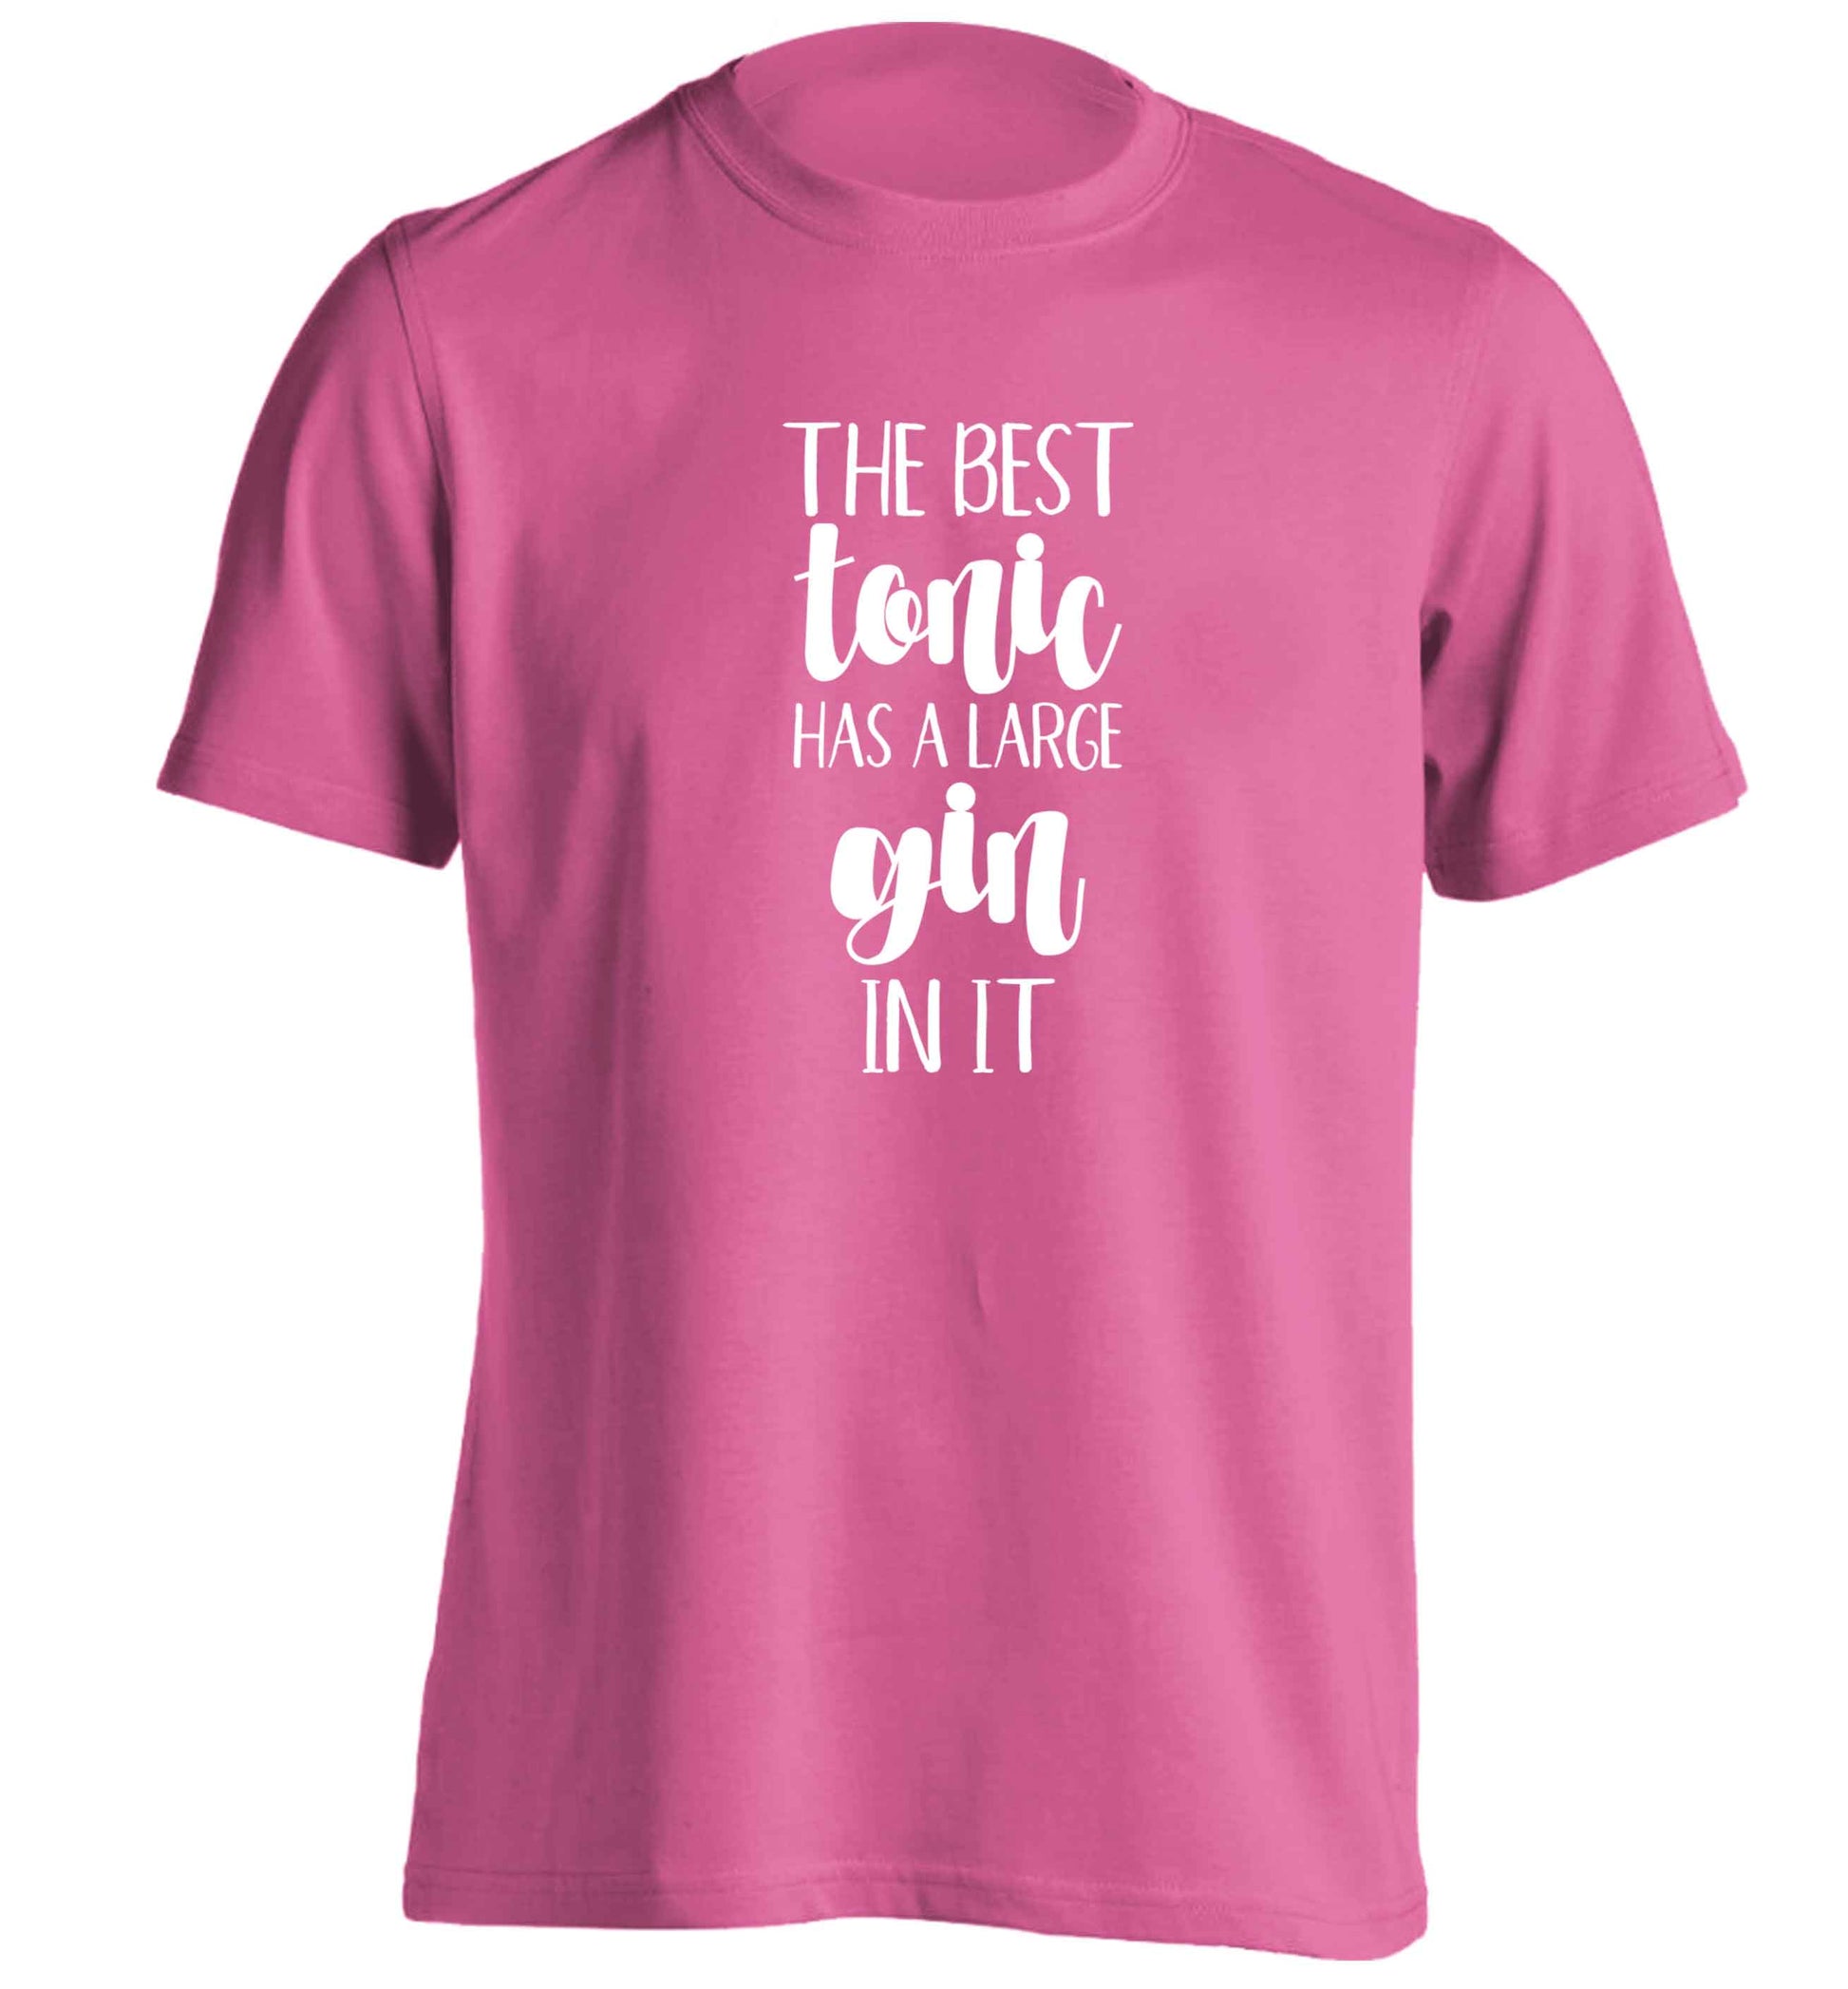 The best tonic has a large gin in it adults unisex pink Tshirt 2XL